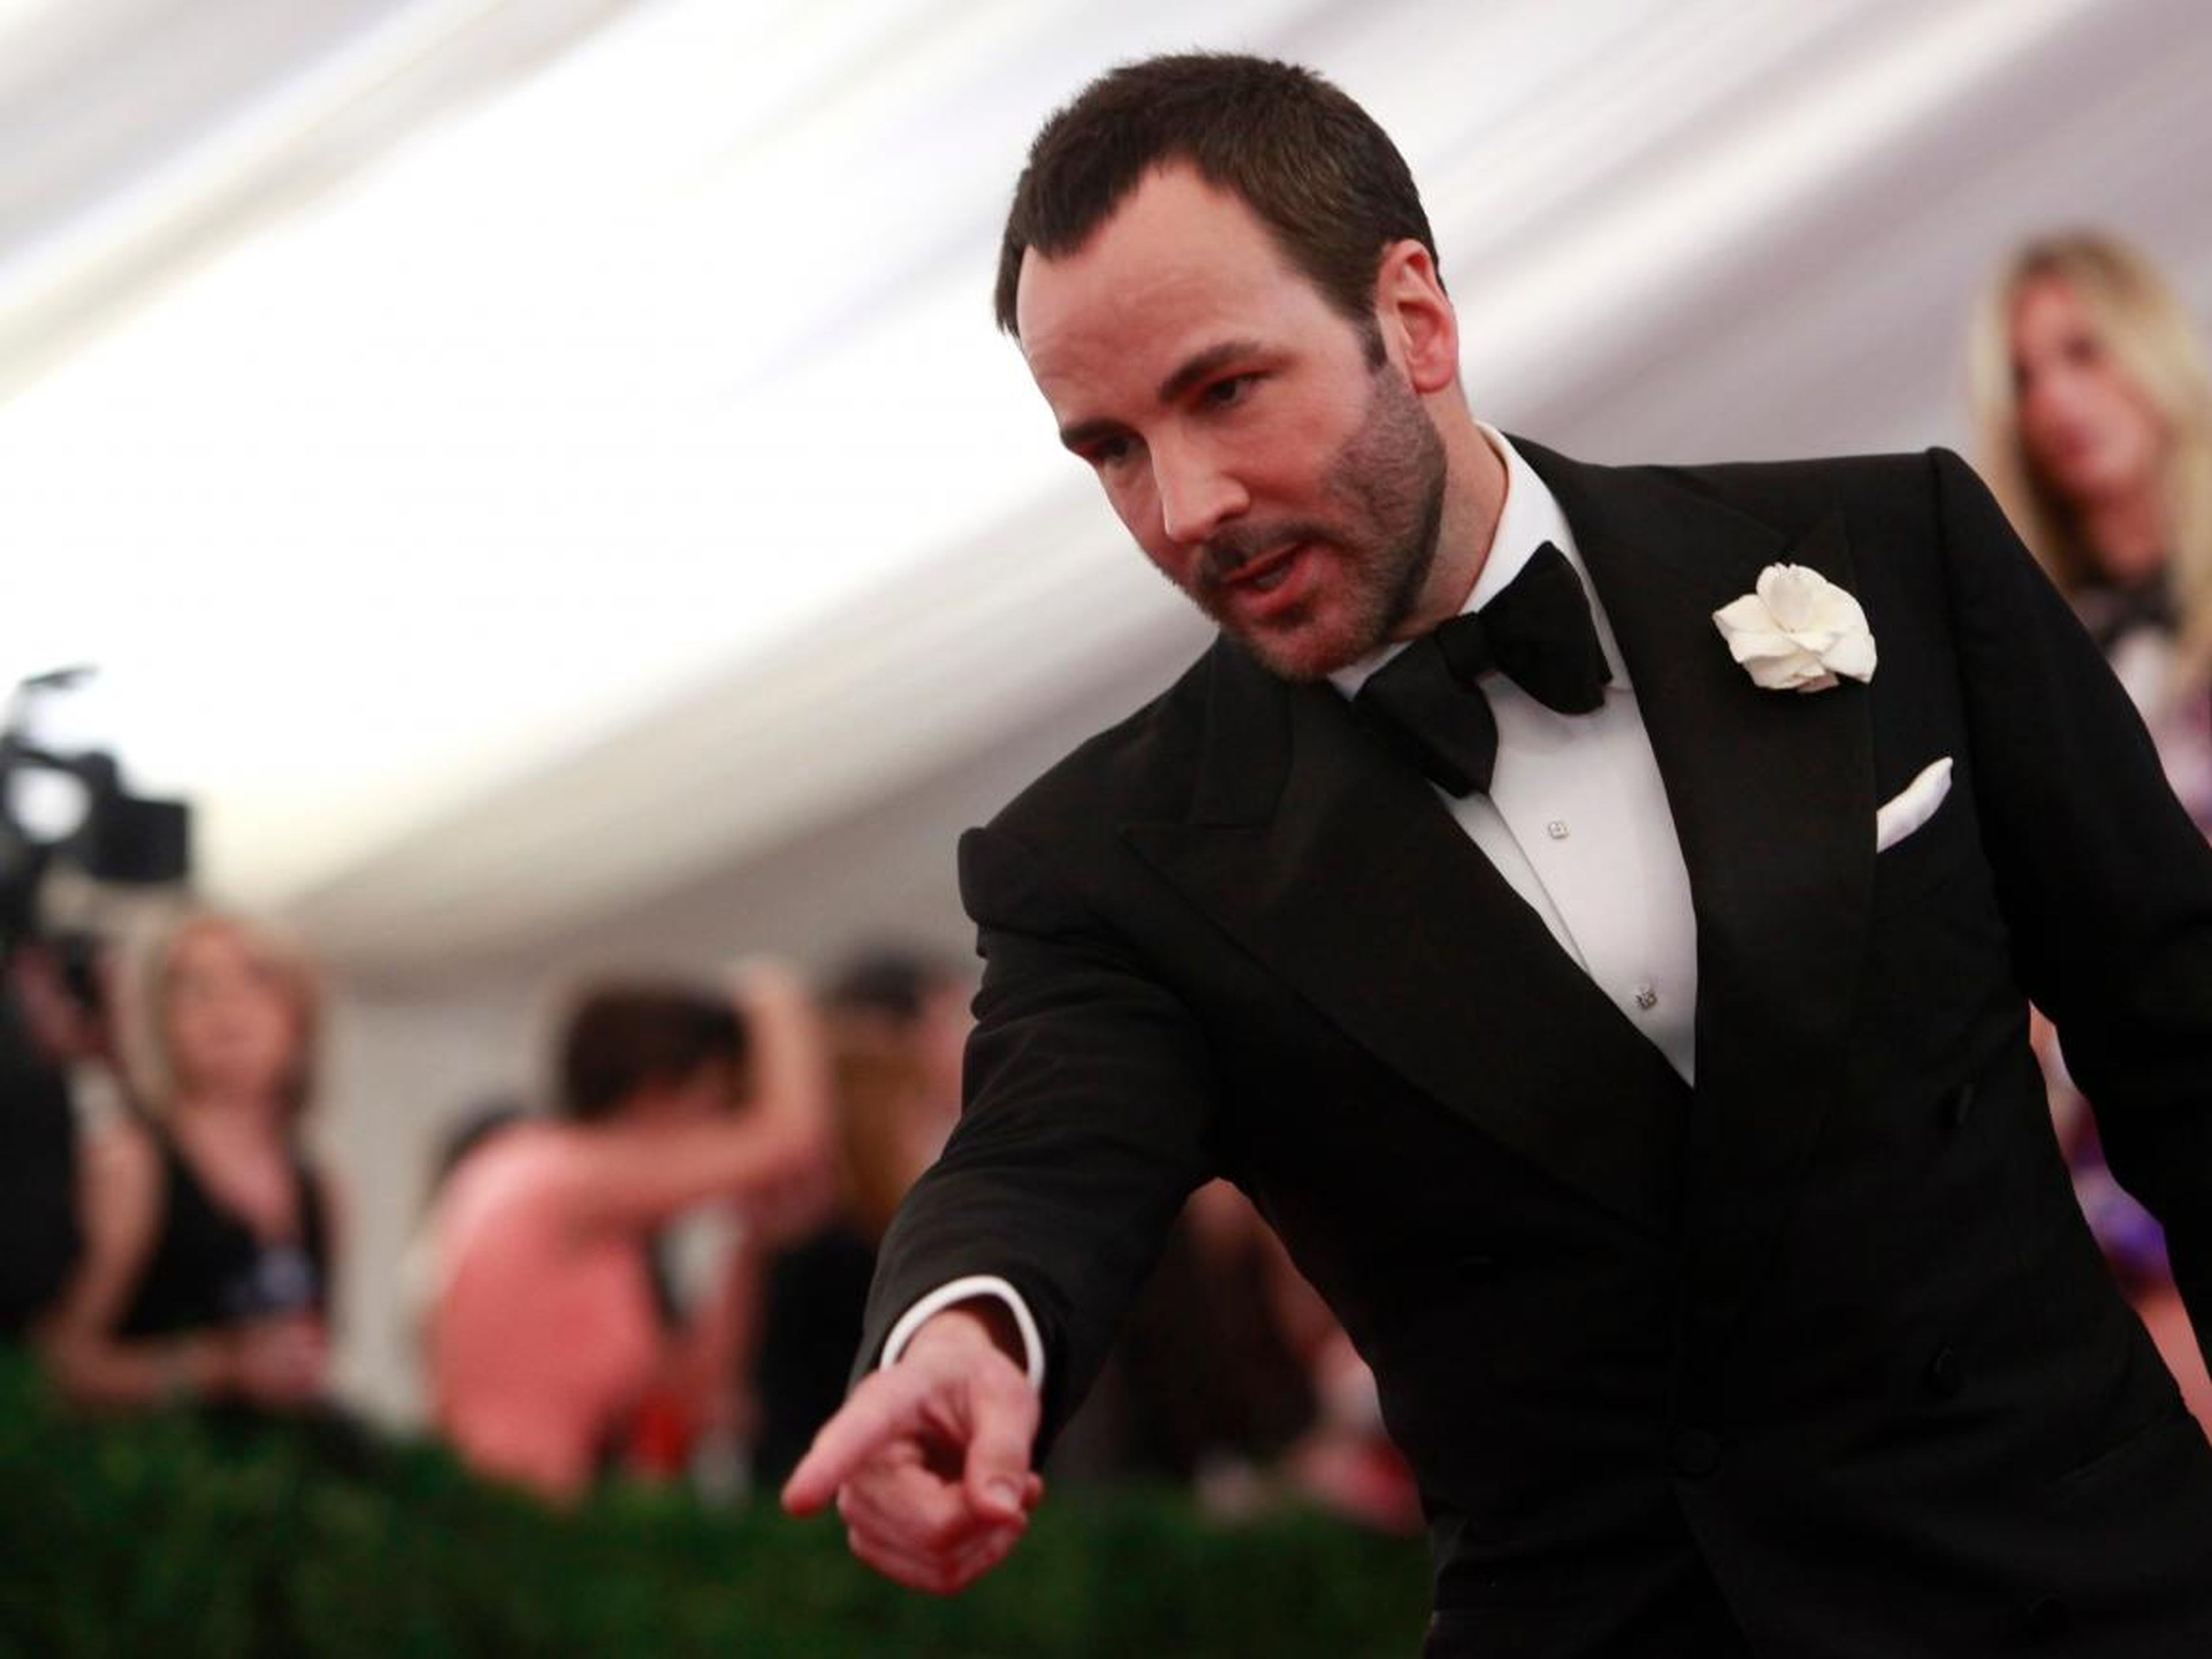 Fashion designer Tom Ford attributes his success not to talent but to his energy: He's awake 21 hours a day, getting only three hours' sleep.